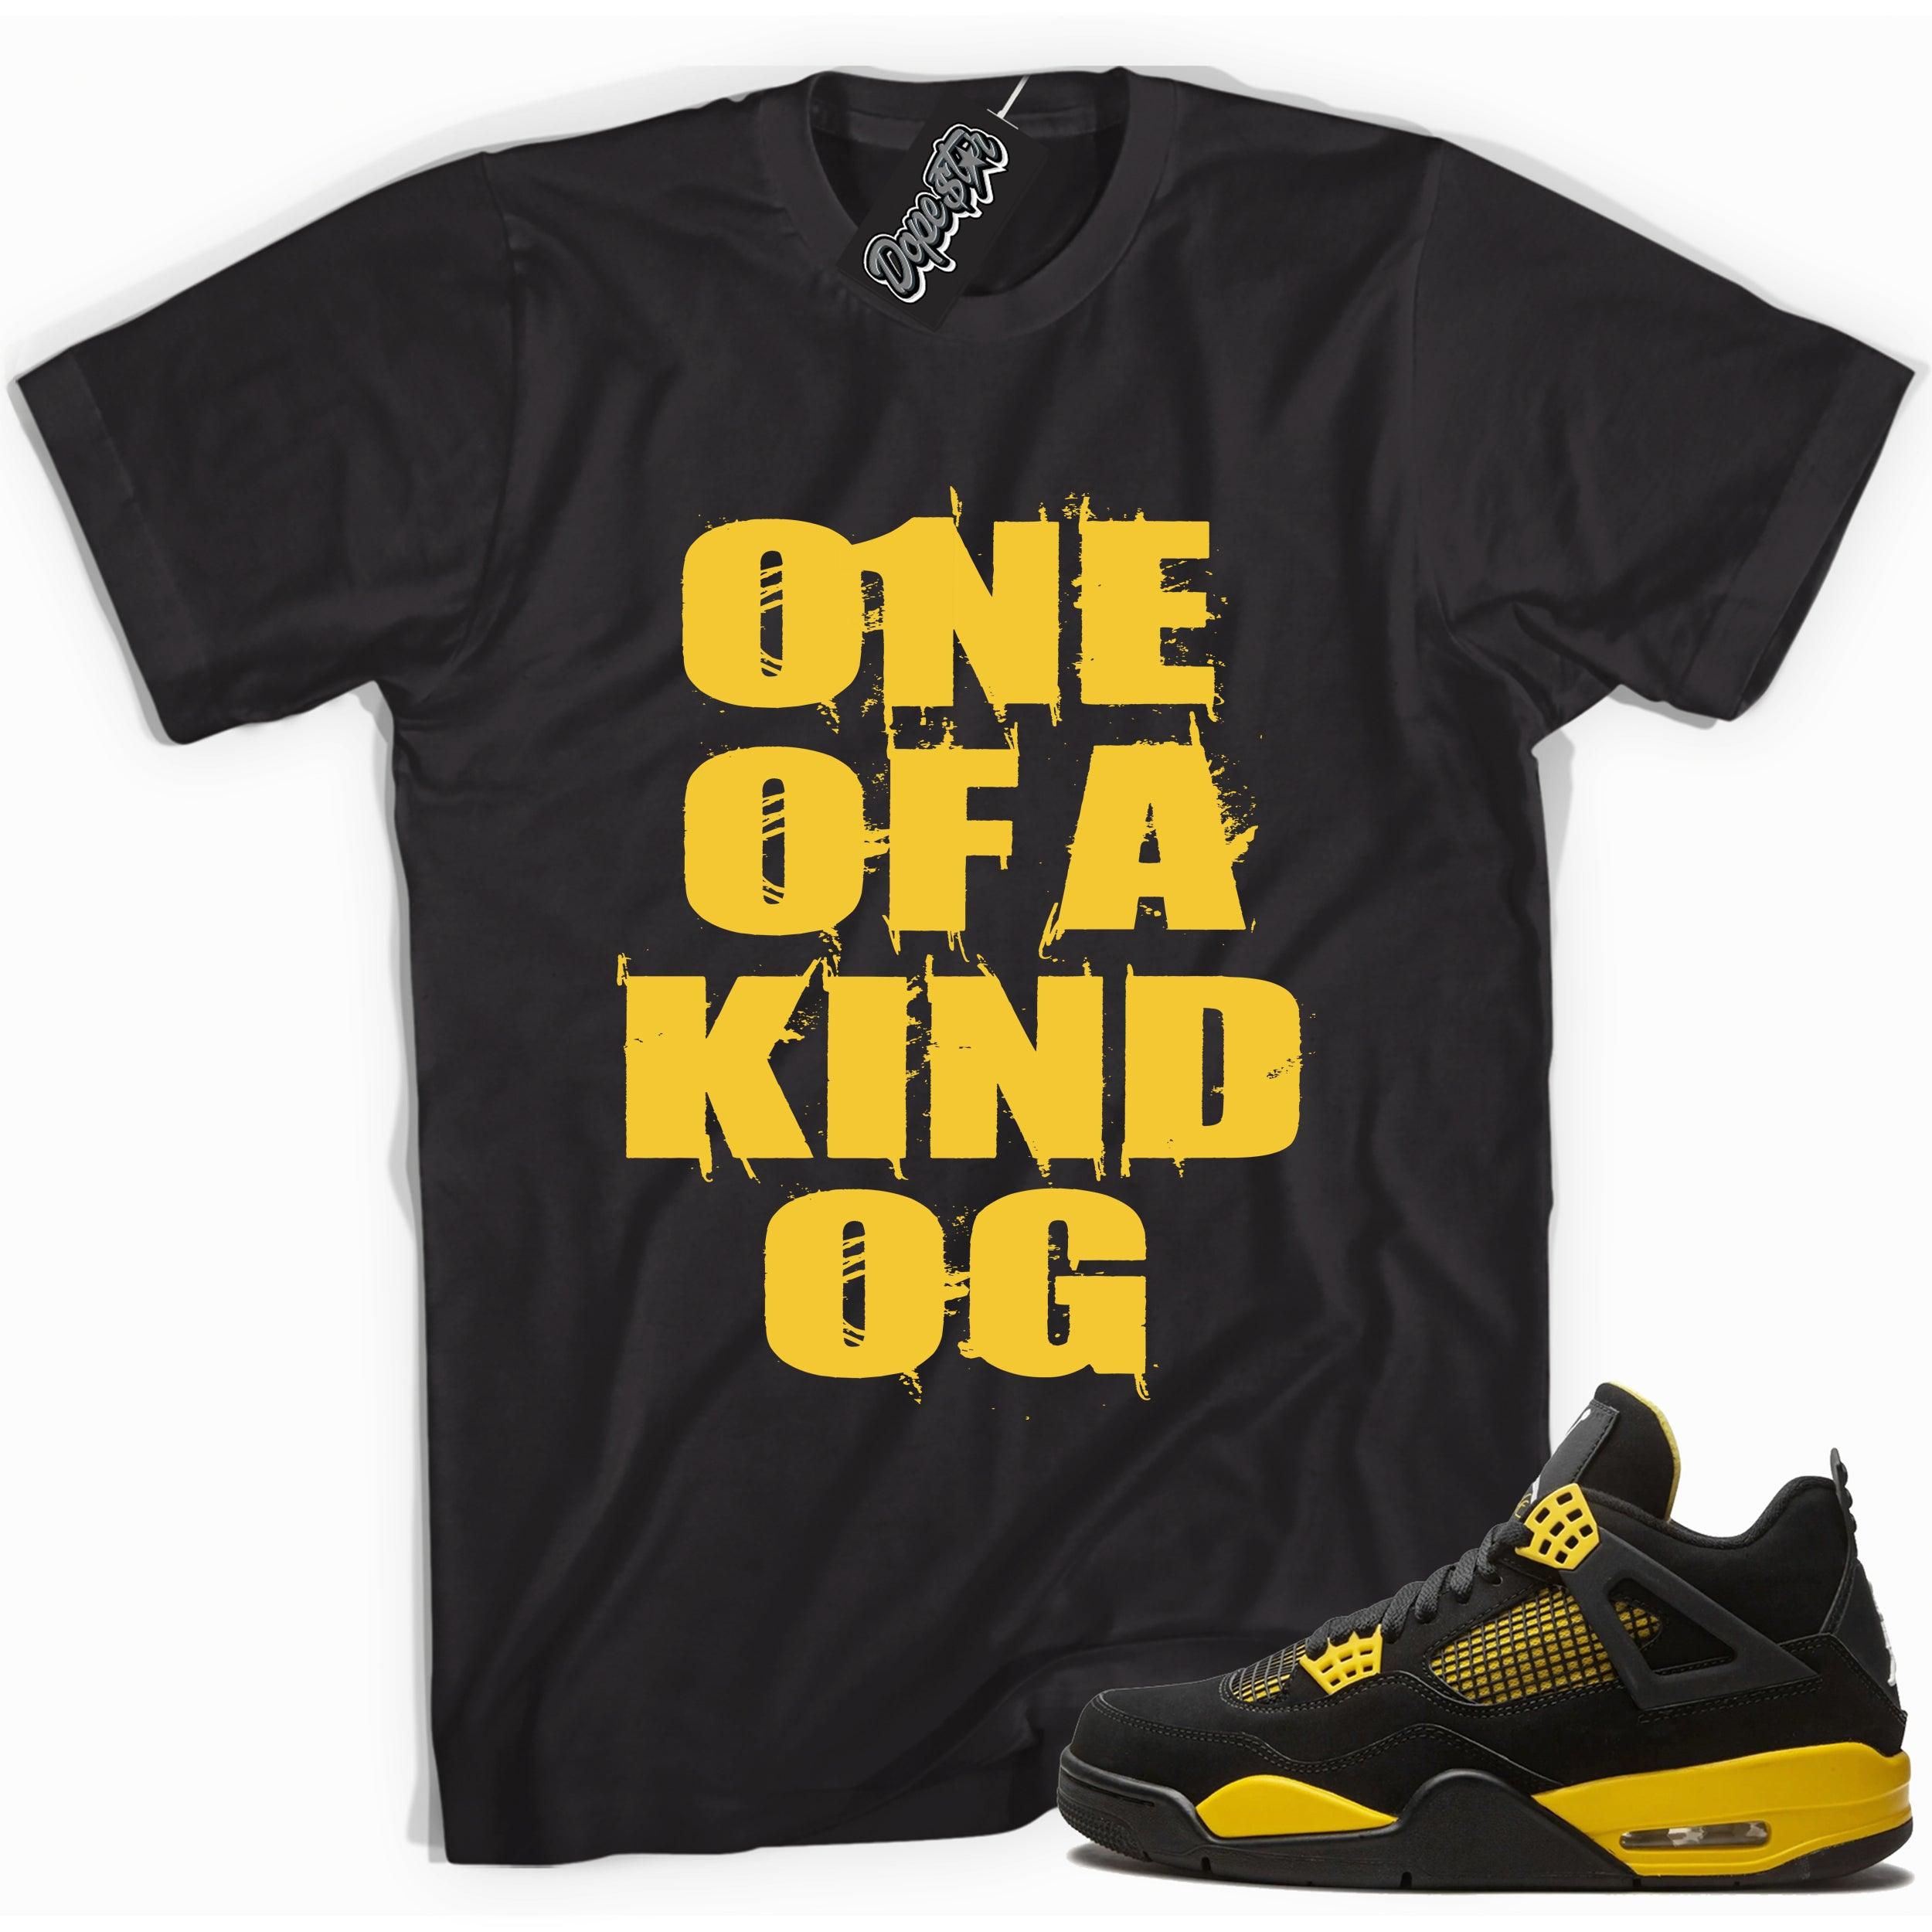 Cool black graphic tee with 'one of a kind' print, that perfectly matches Air Jordan 4 Thunder sneakers